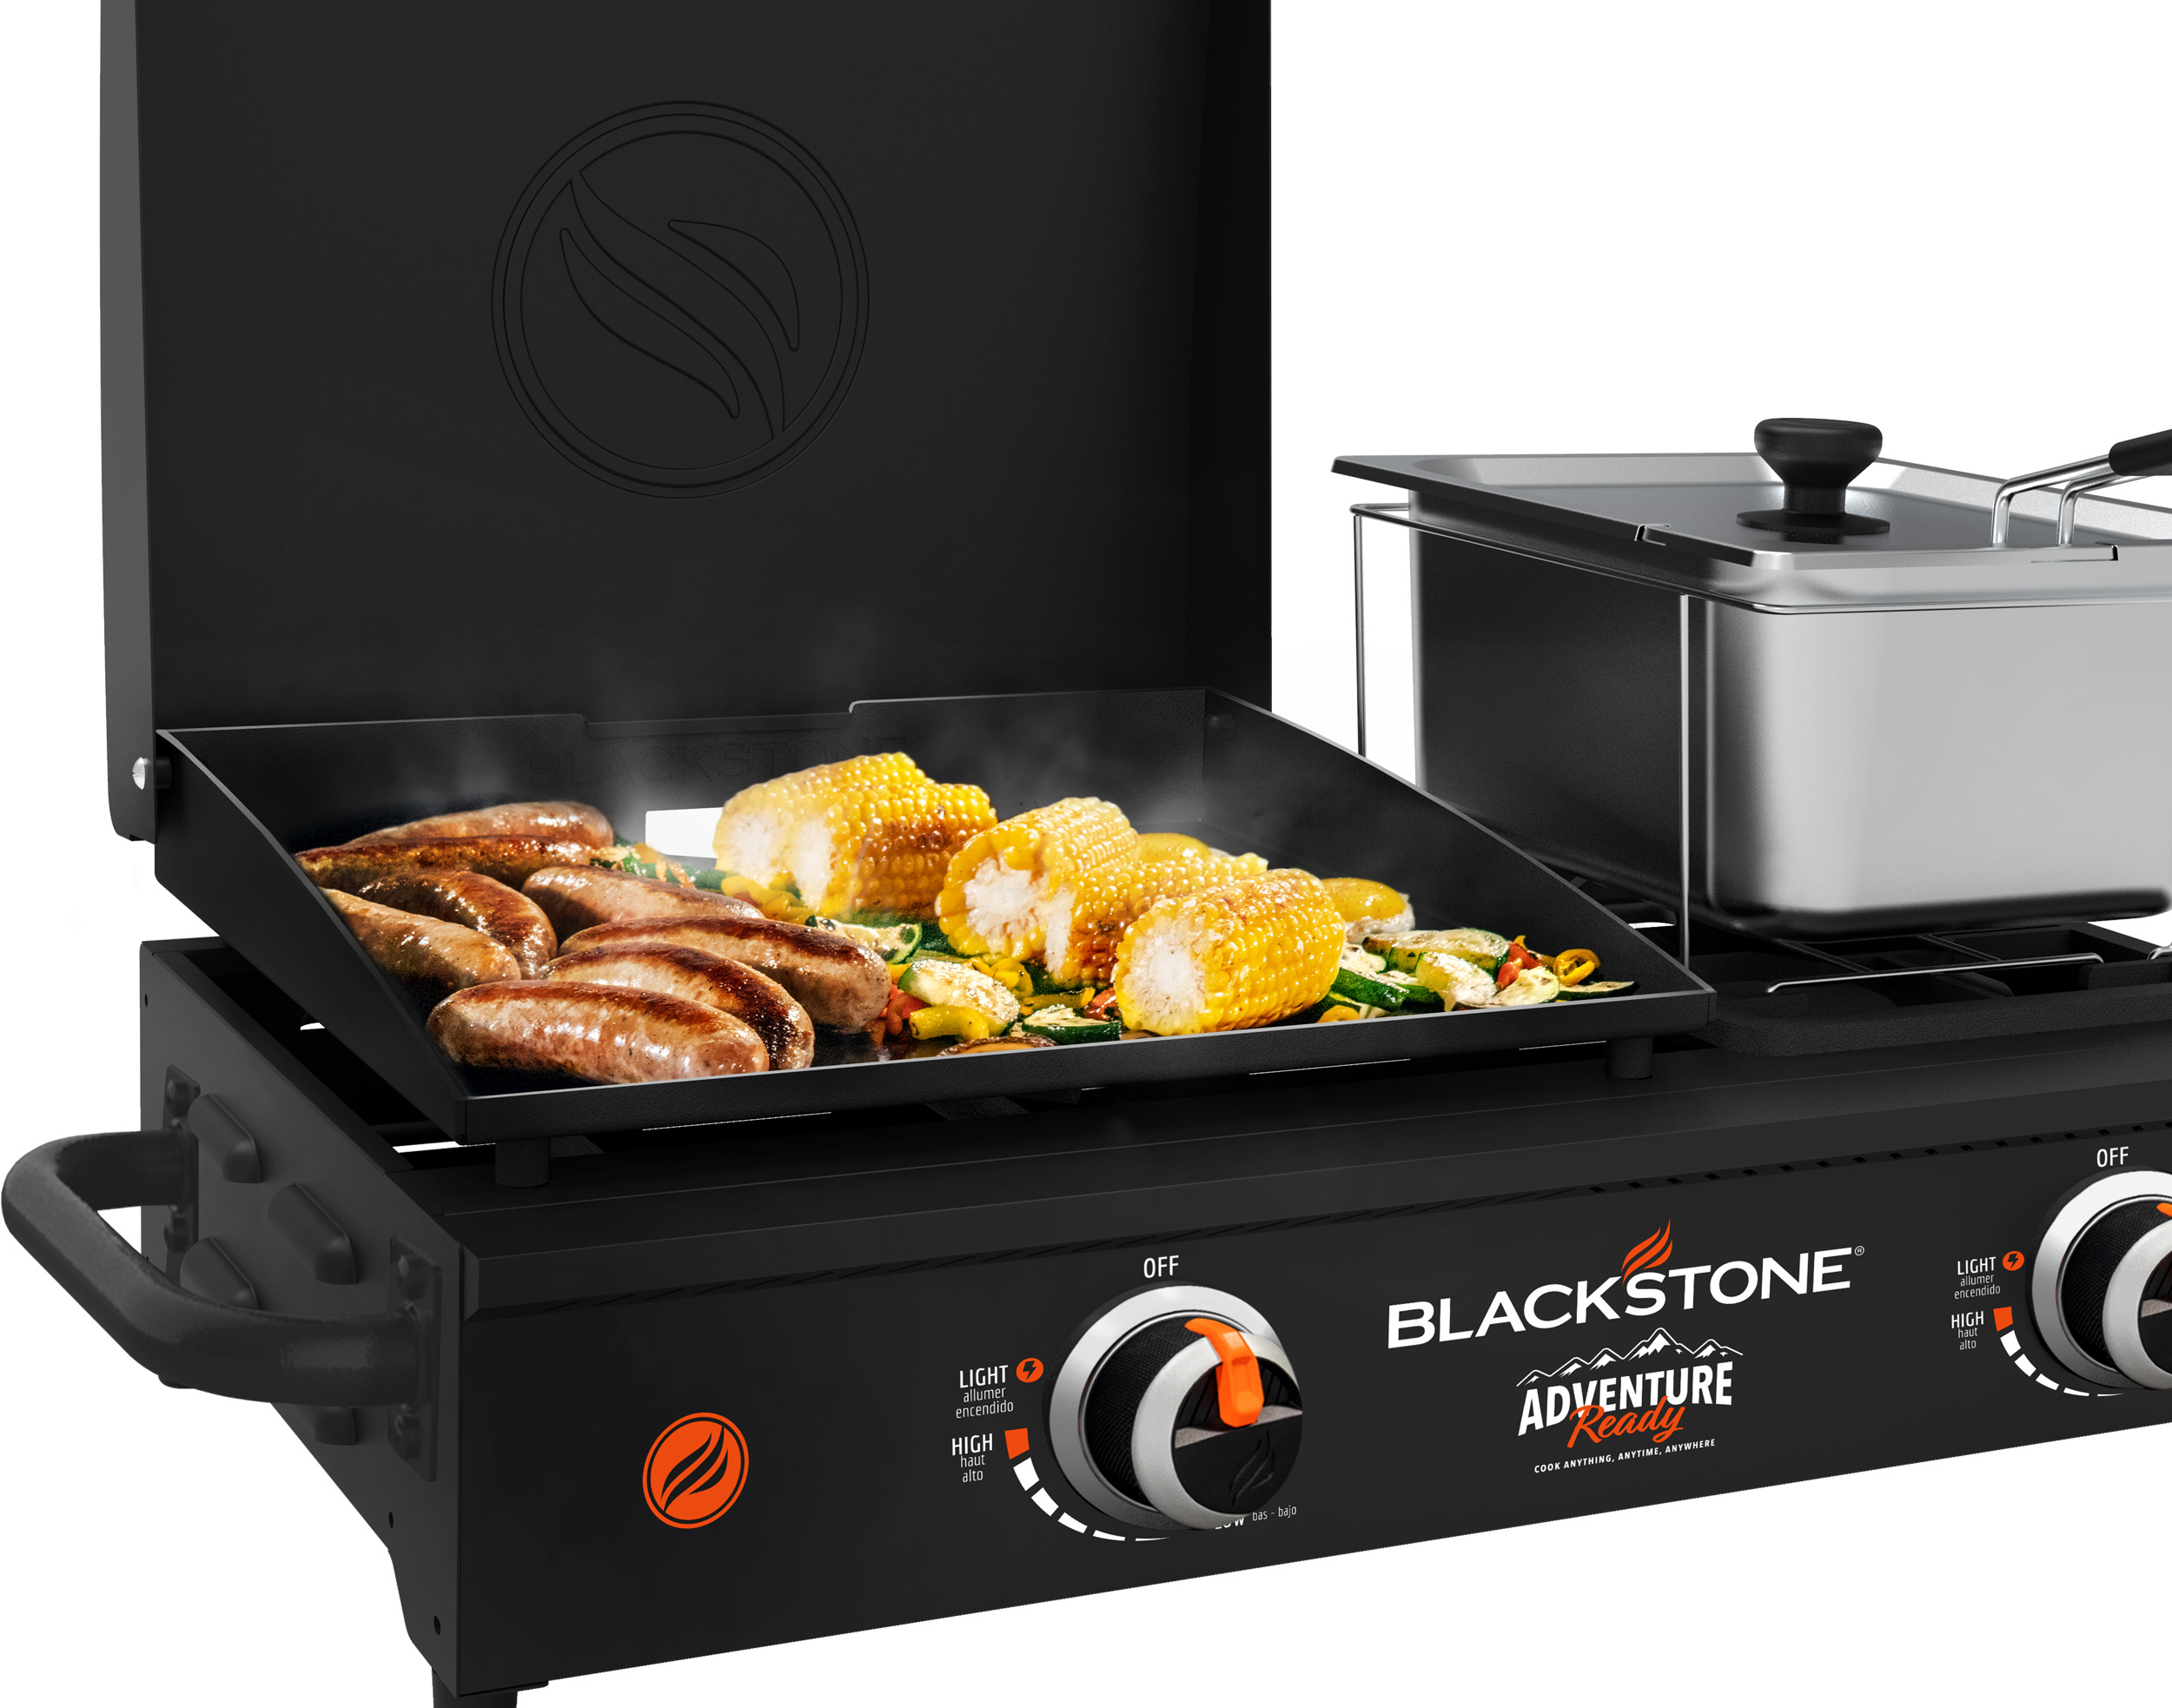 Blackstone Adventure Ready 17" Tabletop Griddle Combo with Fryer - image 4 of 18